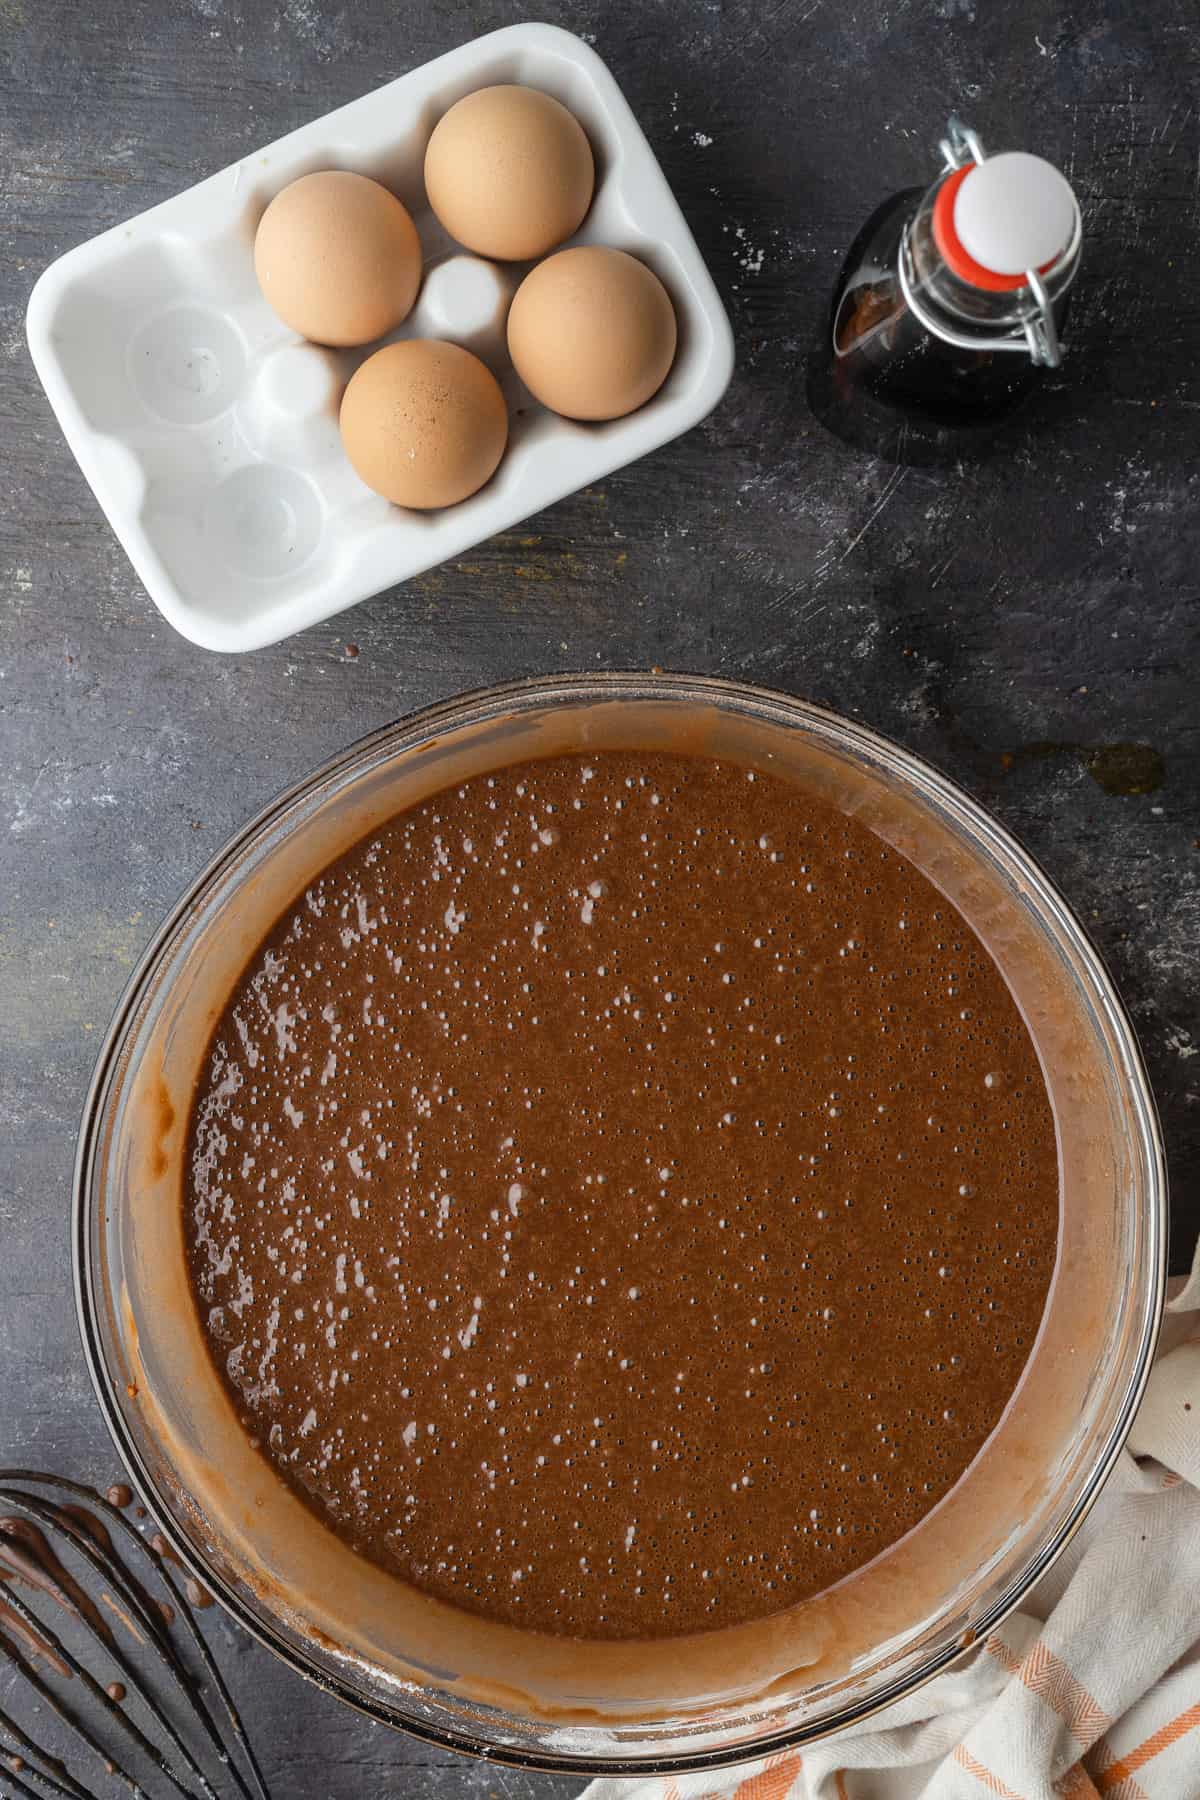 Chocolate cupcake batter in a bowl next to eggs and vanilla extract.